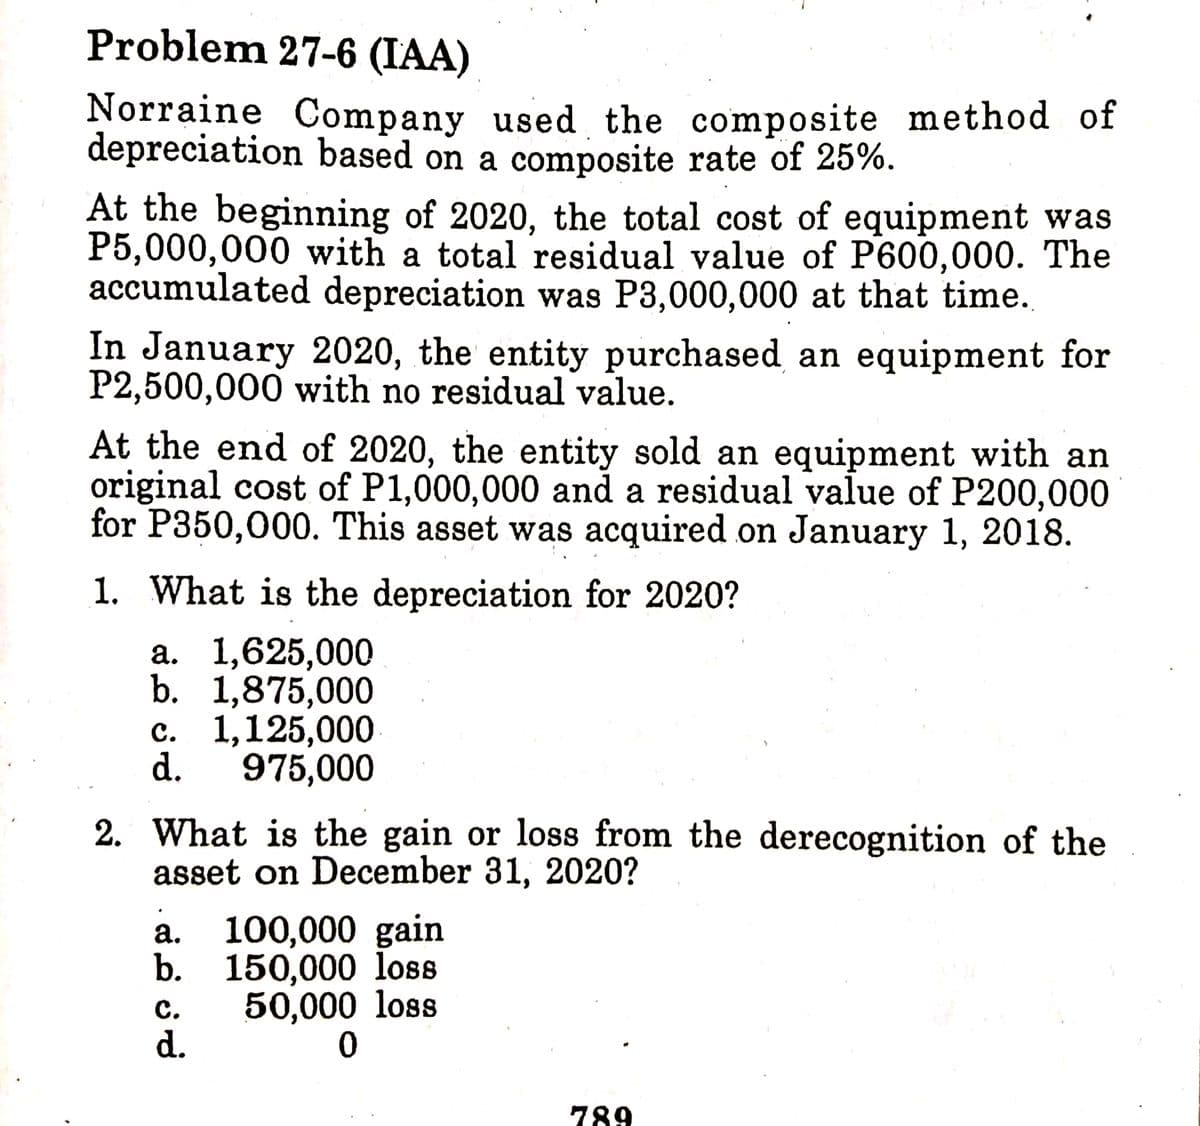 Problem 27-6 (IAA)
Norraine Company used the composite method of
depreciation based on a composite rate of 25%.
At the beginning of 2020, the total cost of equipment was
P5,000,000 with a total residual value of P600,000. The
accumulated depreciation was P3,000,000 at that time.
In January 2020, the entity purchased an equipment for
P2,500,000 with no residual value.
At the end of 2020, the entity sold an equipment with an
original cost of P1,000,000 and a residual value of P200,000
for P350,000. This asset was acquired on January 1, 2018.
1. What is the depreciation for 2020?
а. 1,625,000
b. 1,875,000
с. 1,125,000
d.
975,000
2. What is the gain or loss from the derecognition of the
asset on December 31, 2020?
100,000 gain
b. 150,000 loss
а.
с.
50,000 loss
d.
789
